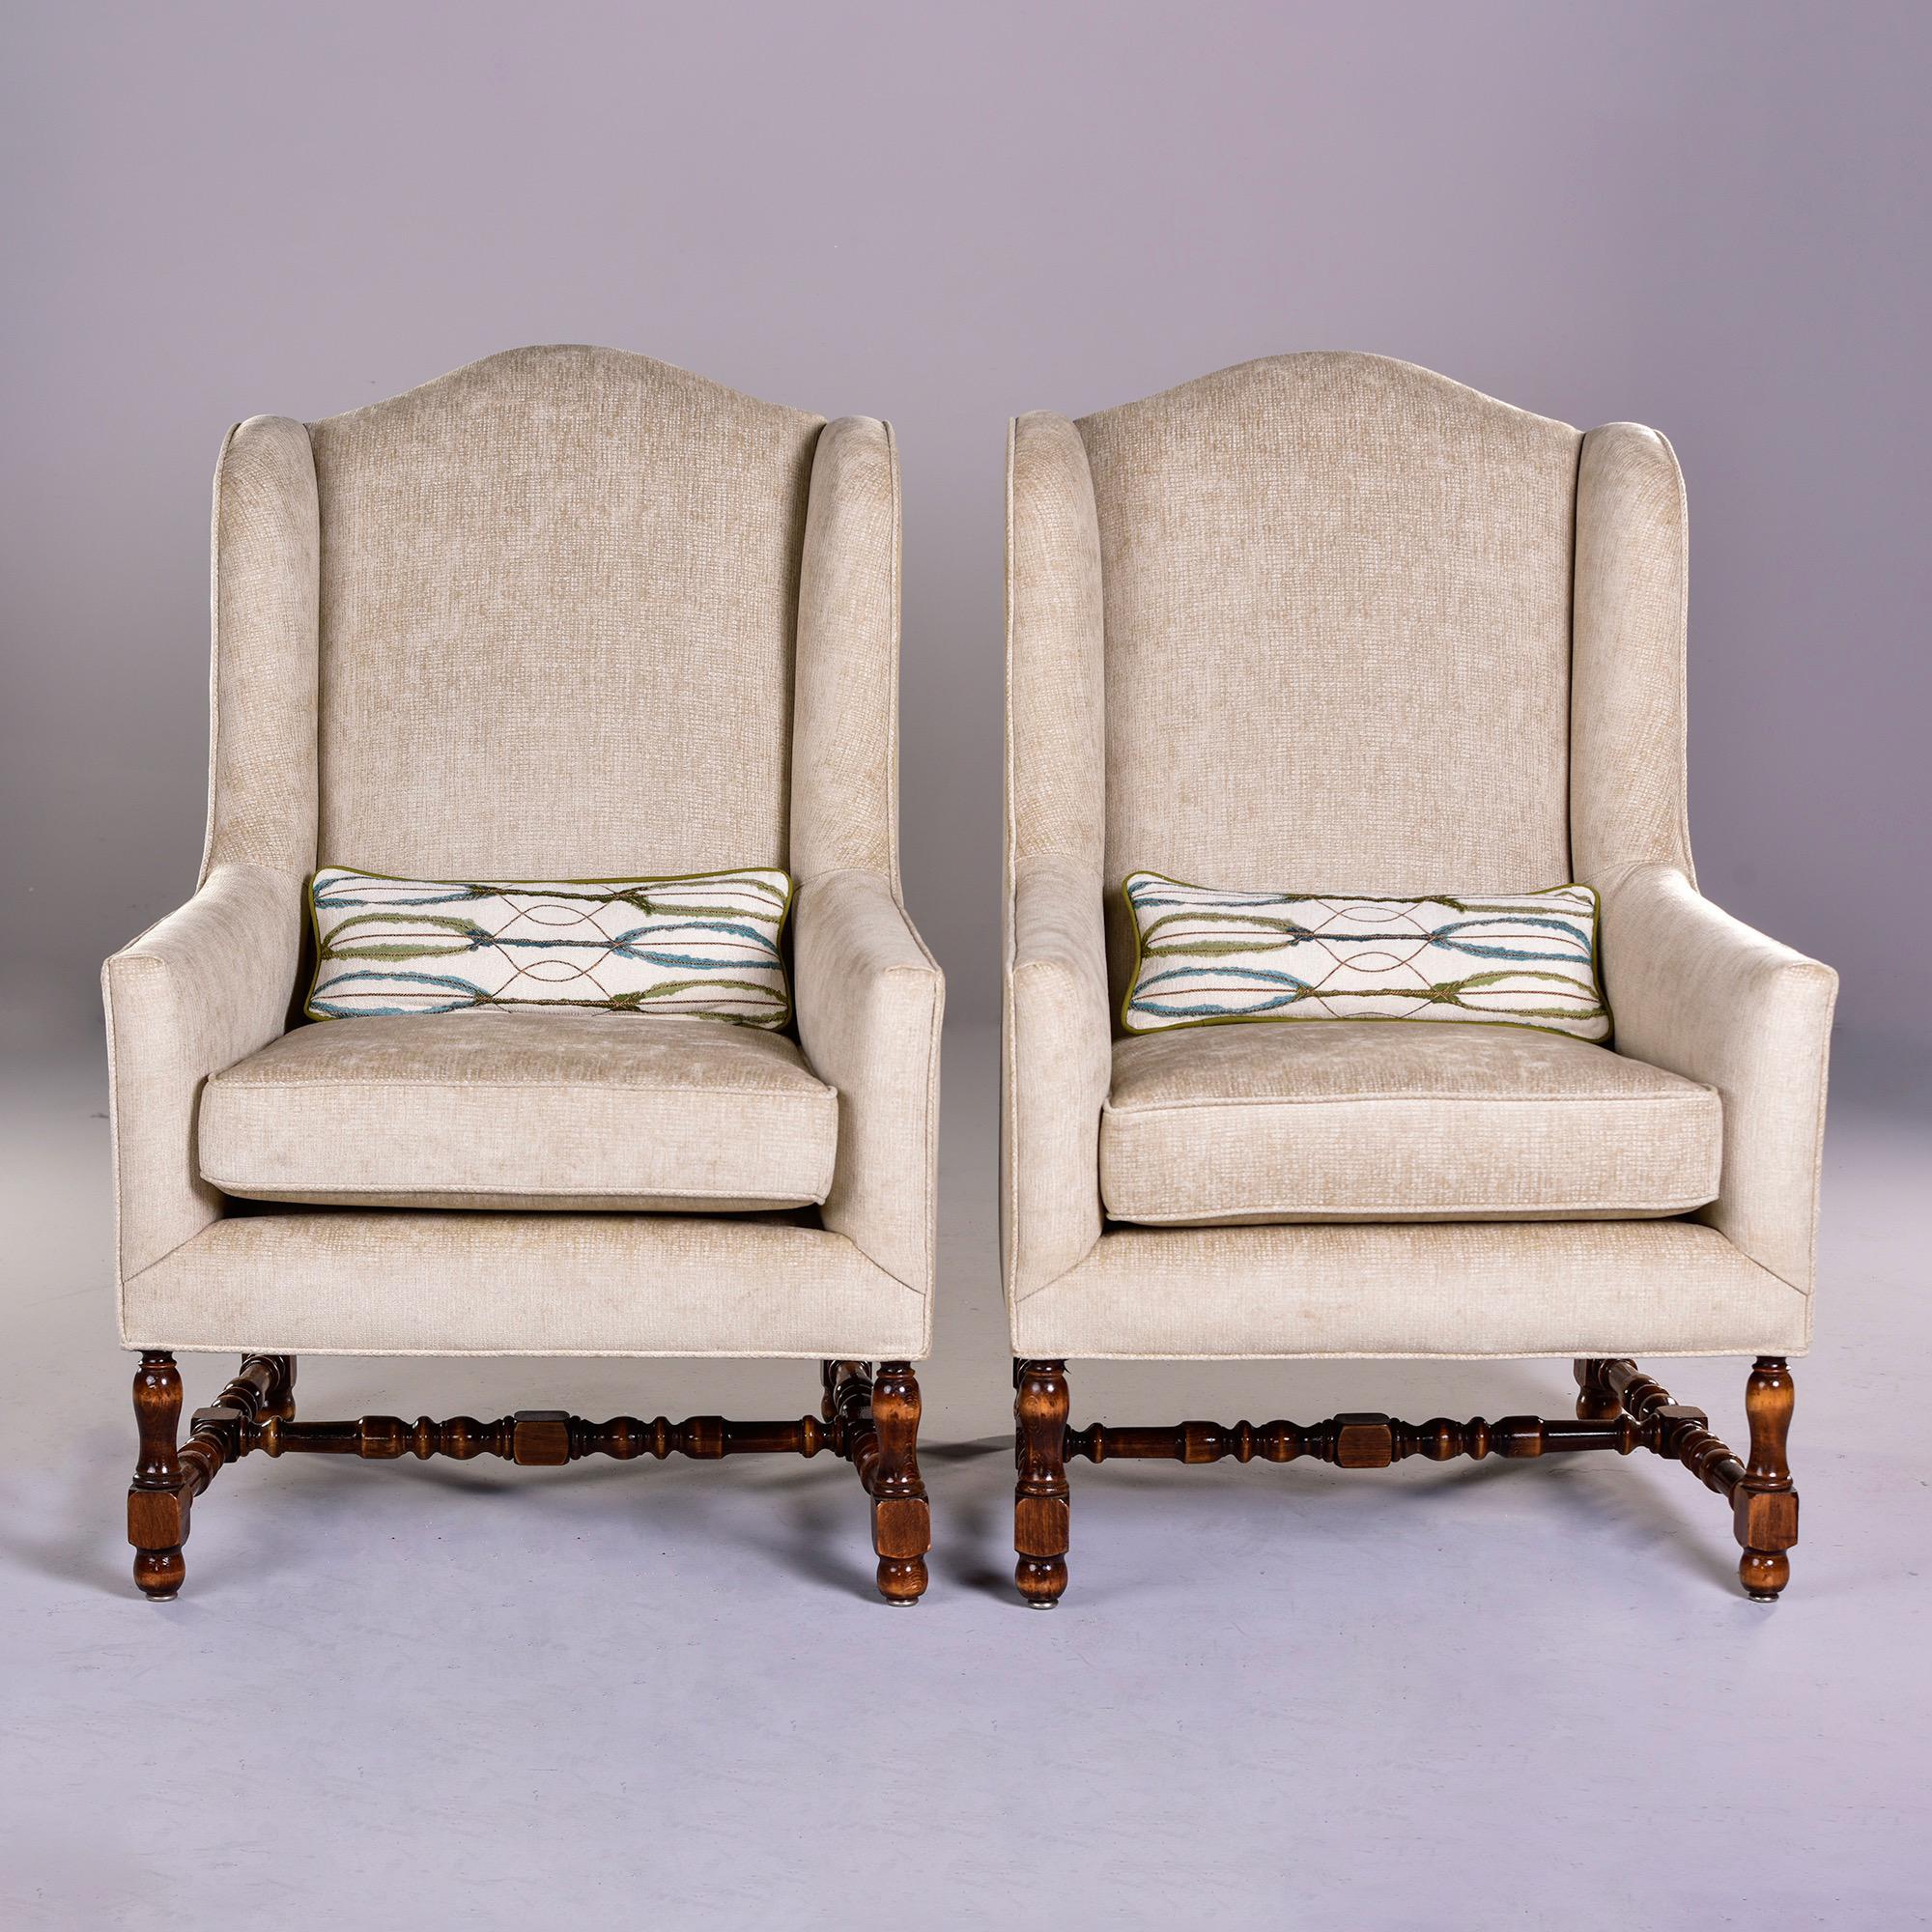 Pair of circa 1920s tall French winged armchairs with turned legs and stretchers, new off sand colored chenille velvet upholstery and coordinating separate lumbar cushions in Pindler fabric. Unknown maker - sold and priced as a pair. 


Measures: